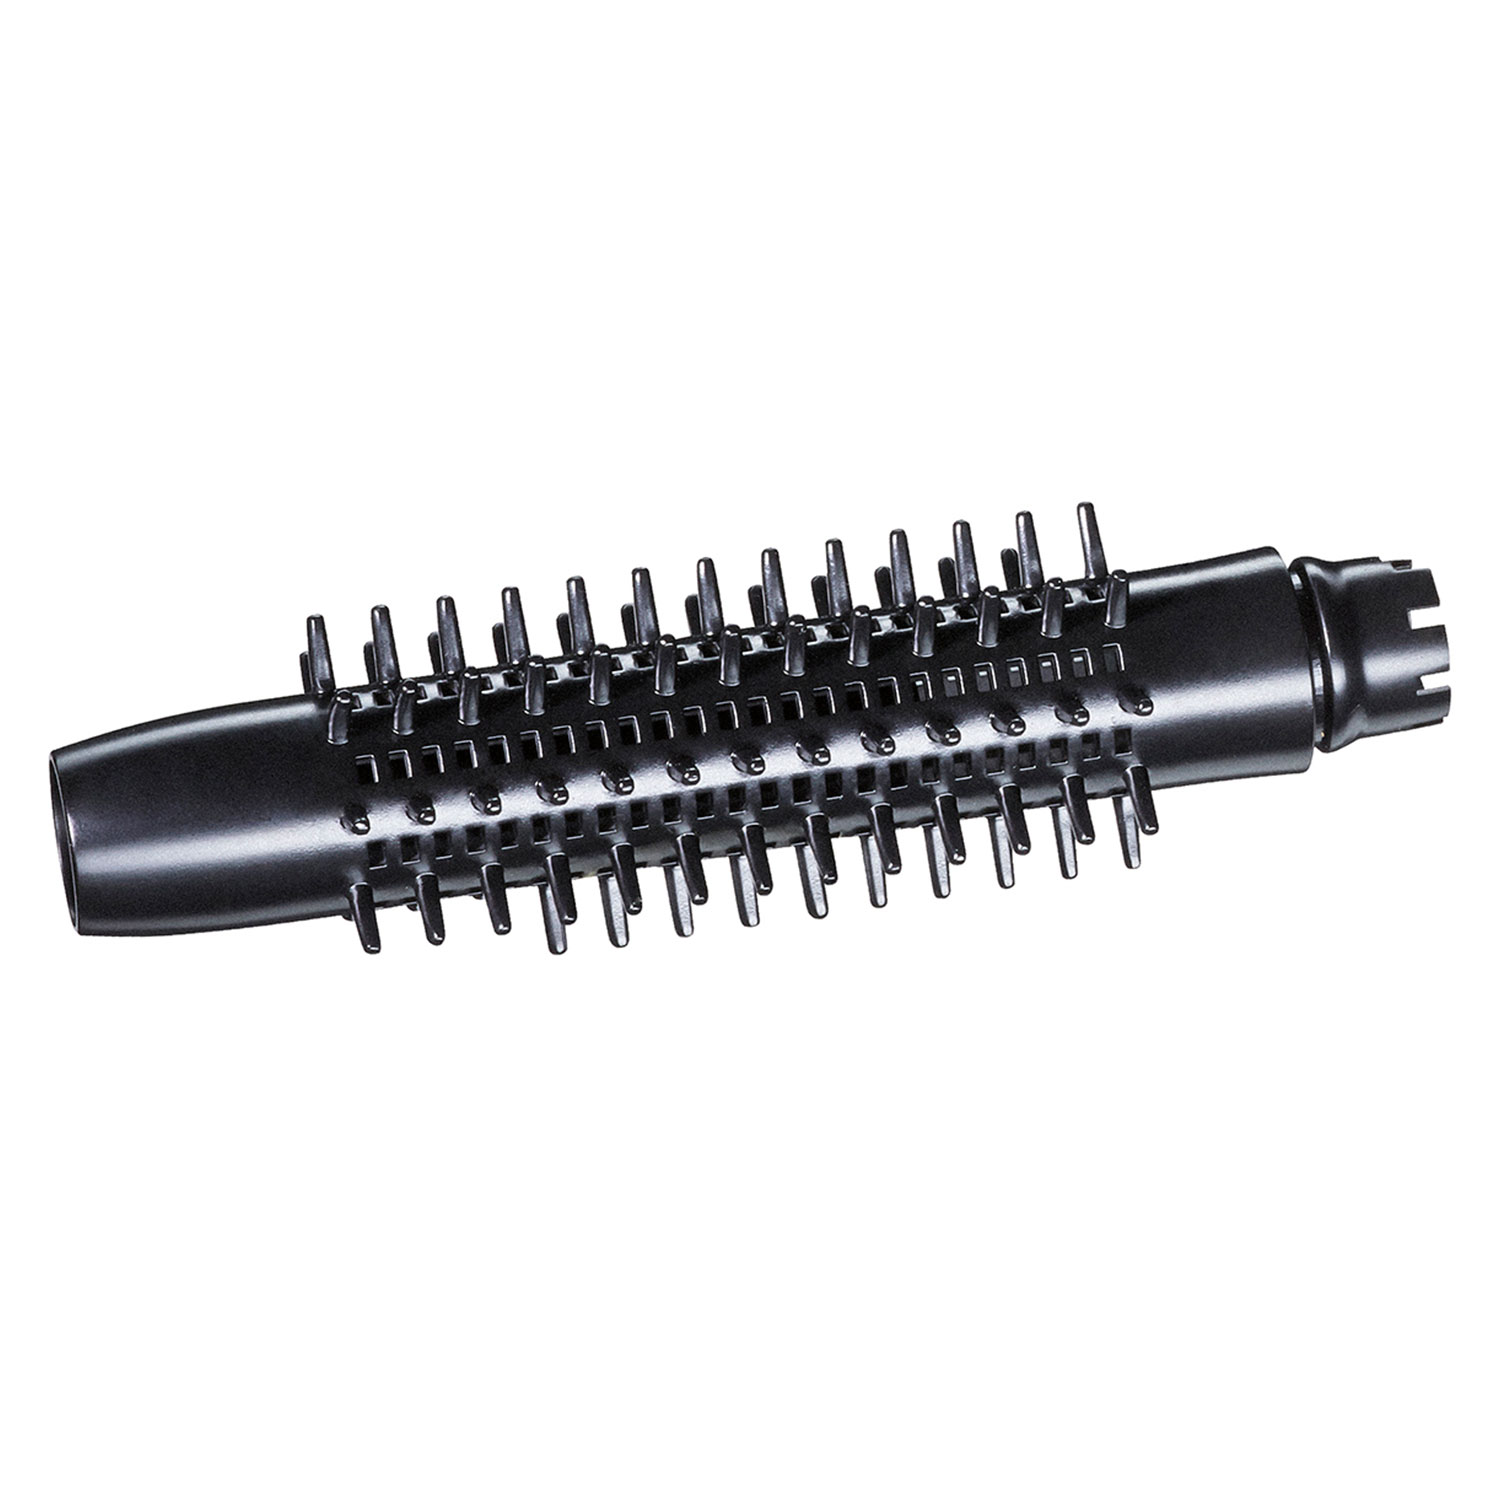 Babyliss Pro MAGIC STYLAIR Airstyler 18 mm 